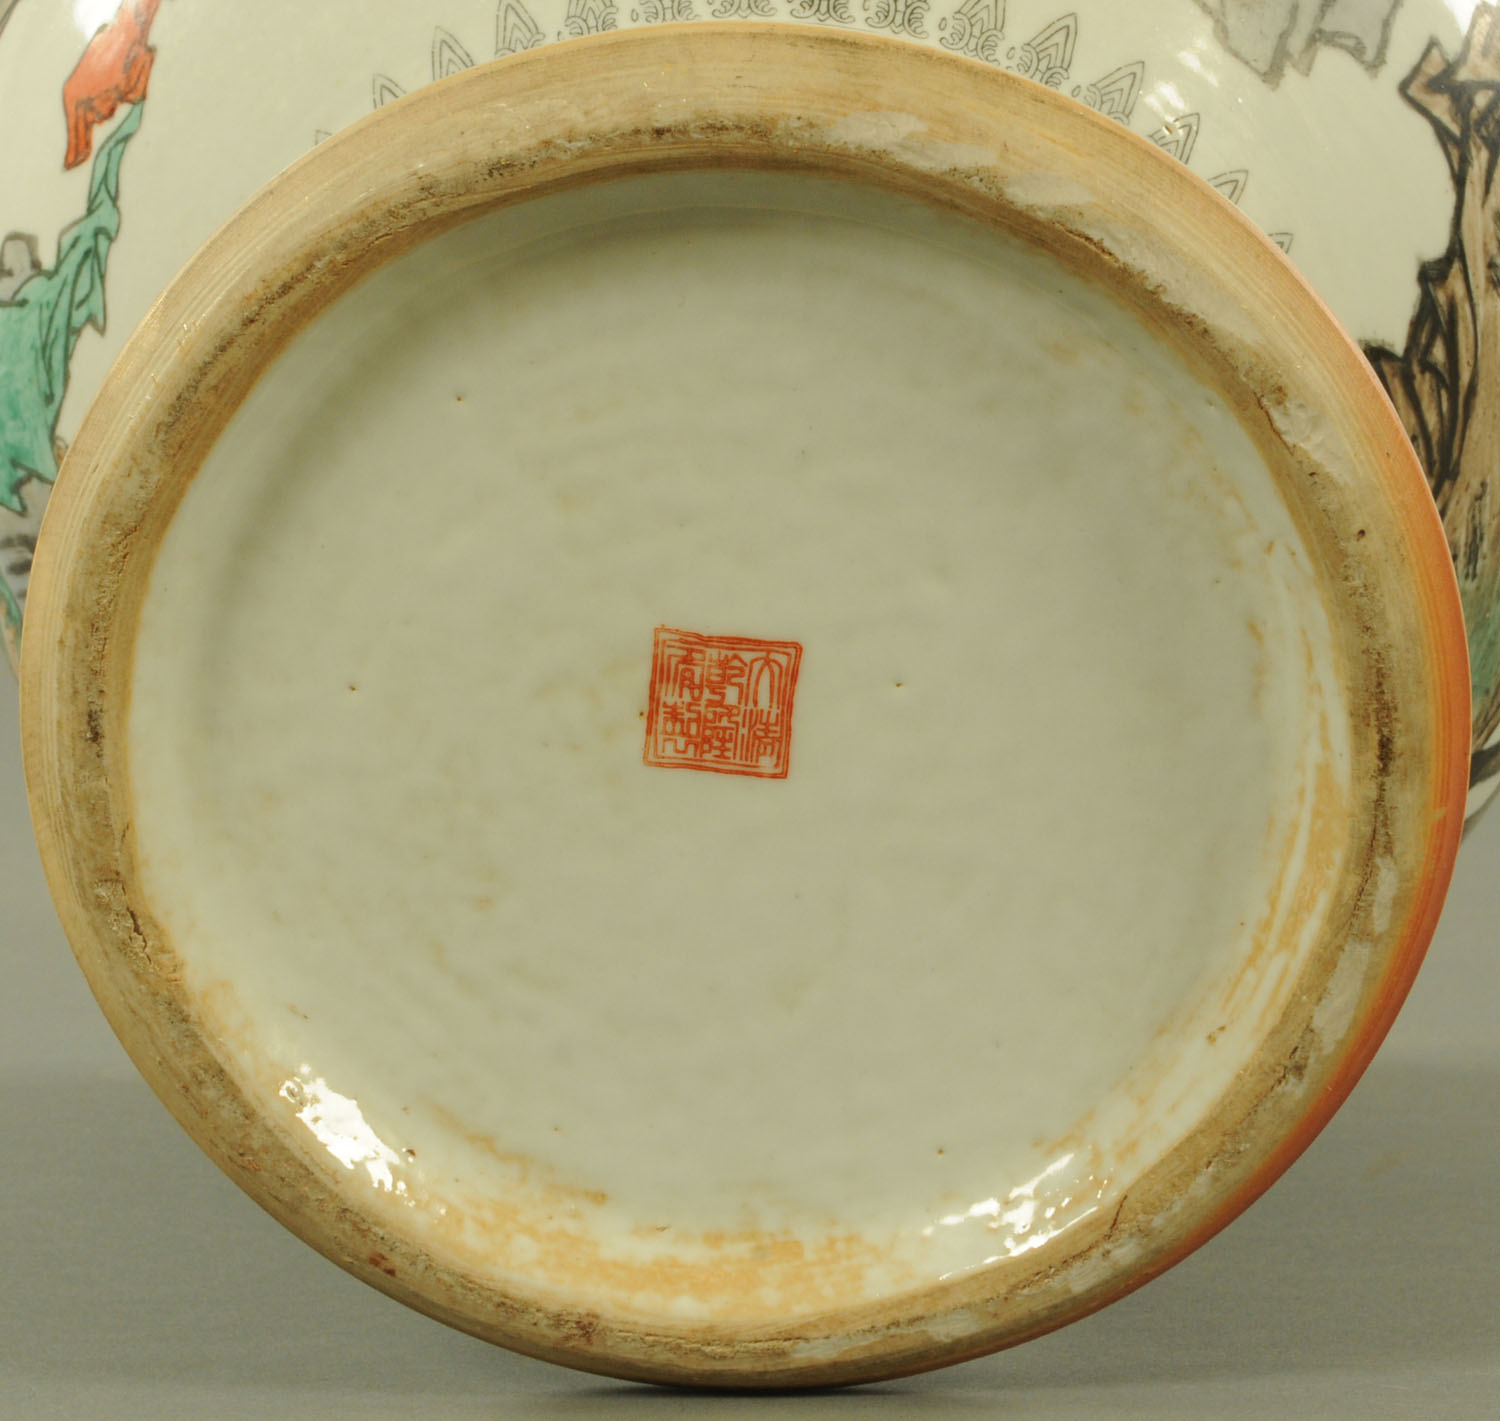 A Chinese porcelain vase, 20th century, with transfer printed decoration heightened with enamels, - Image 28 of 29